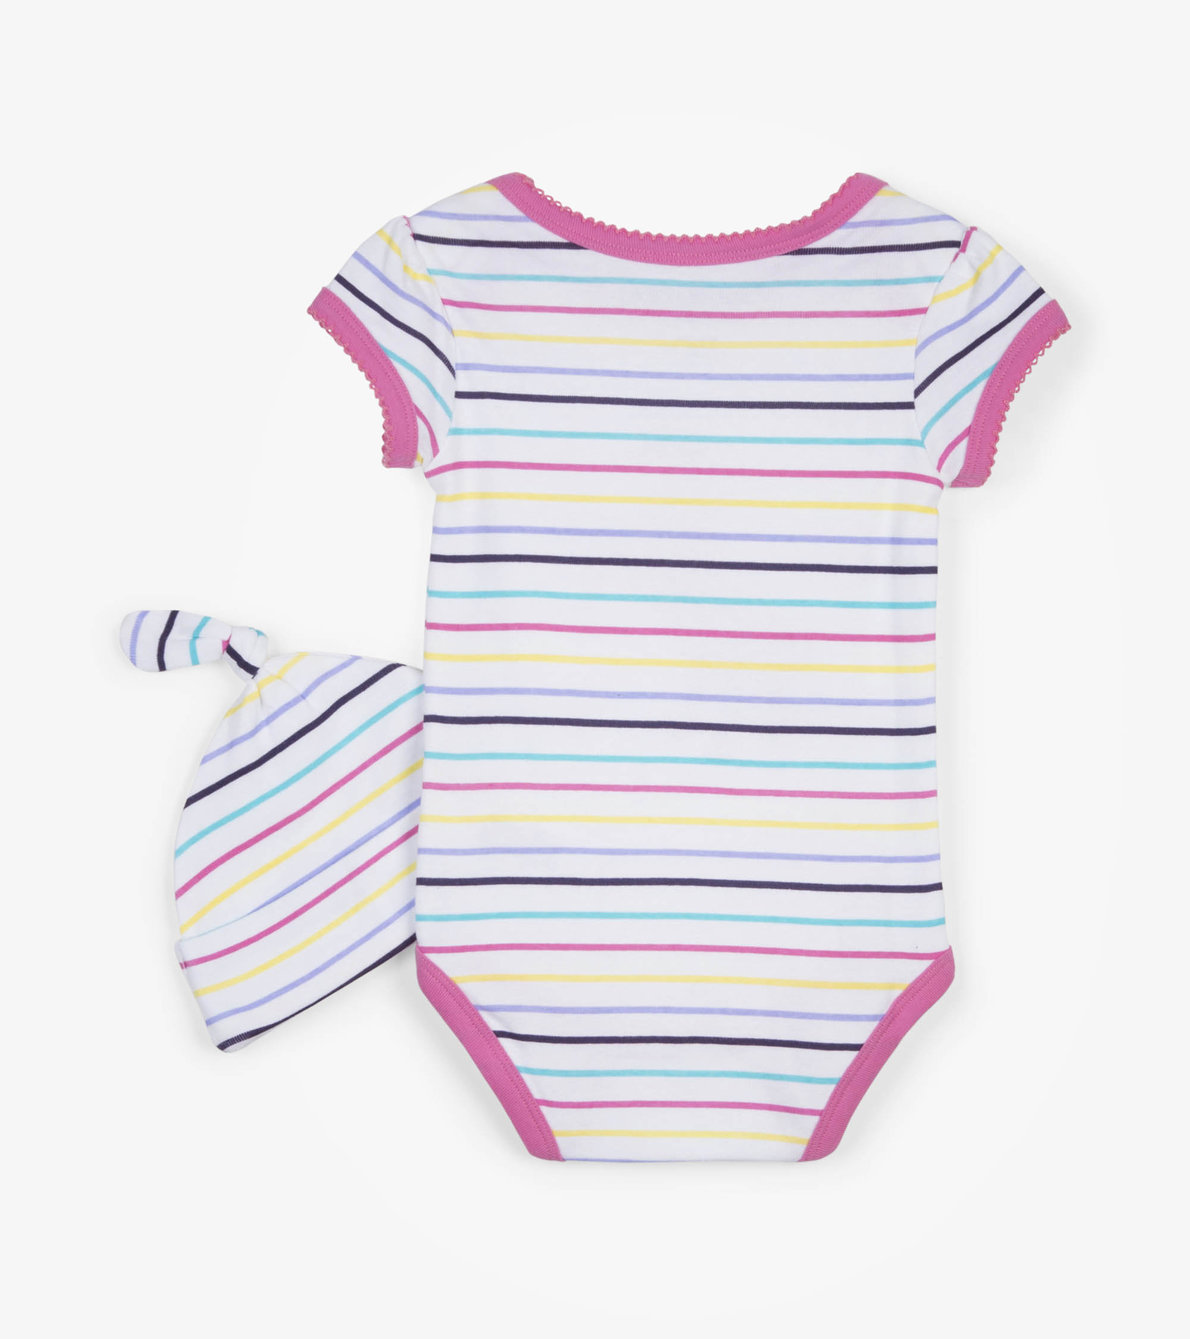 View larger image of Rainbow Unicorn Baby Bodysuit with Hat